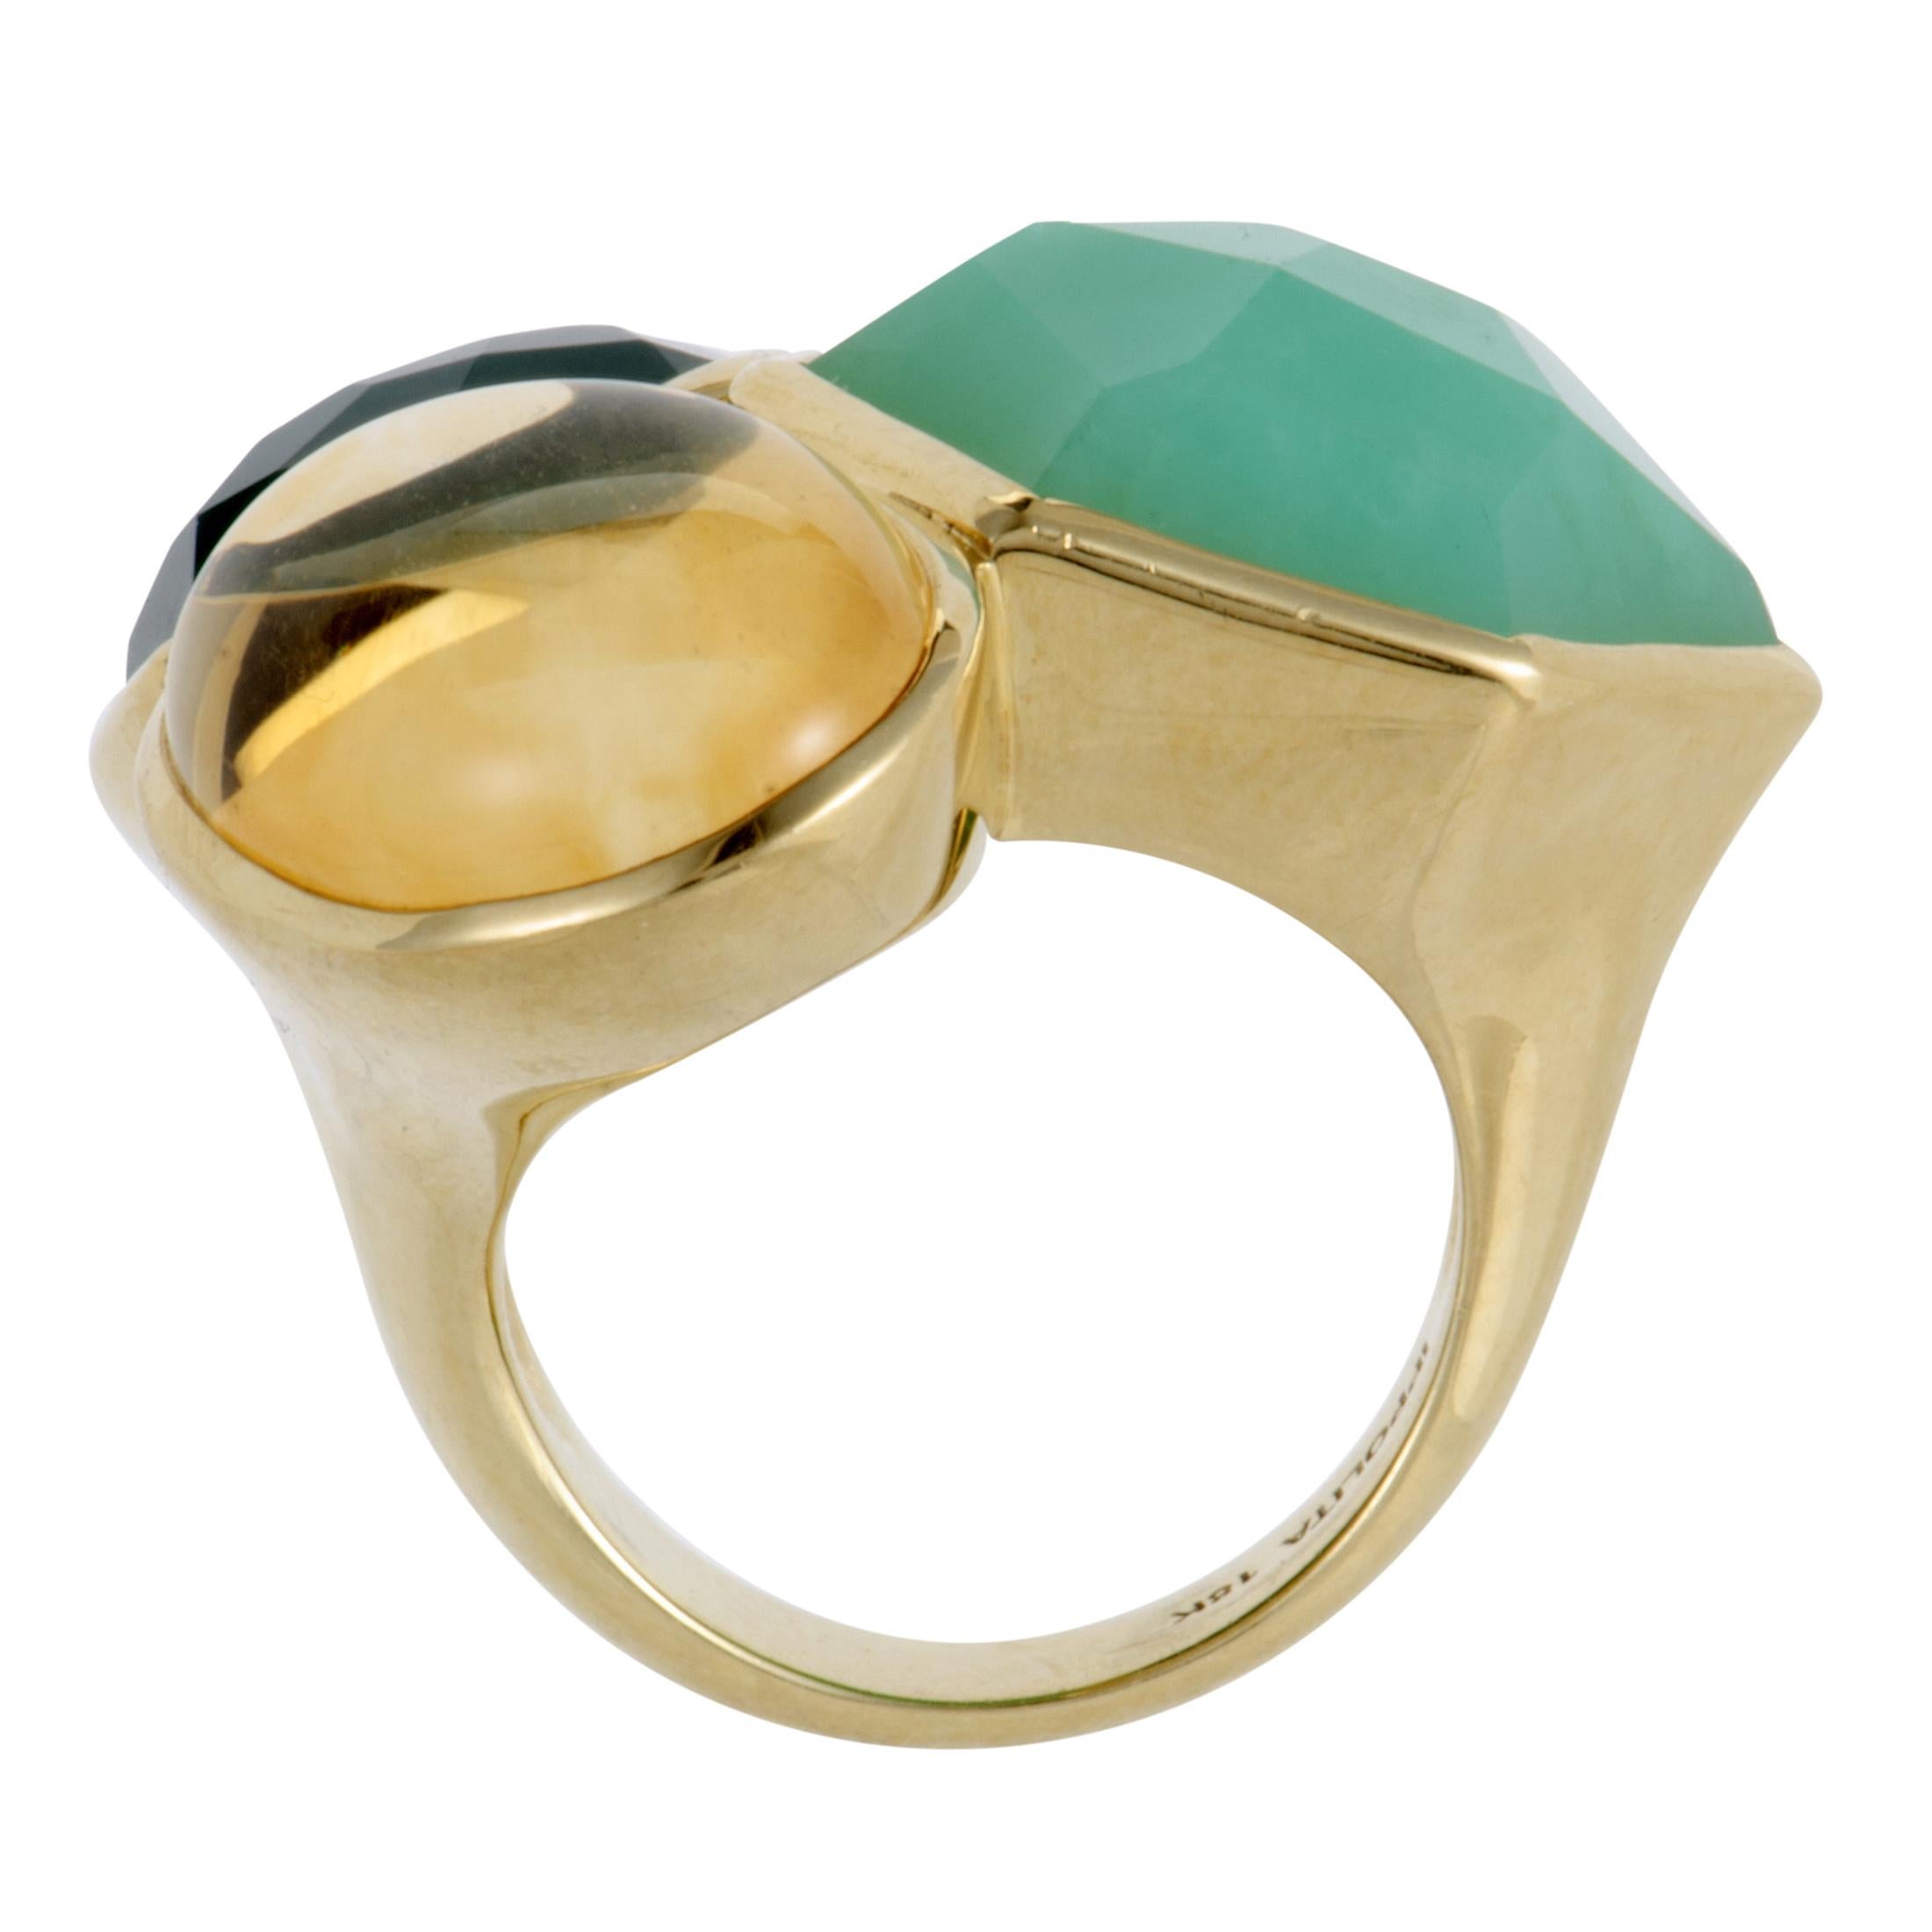 The alluring combination of warm gleaming tones and regal green nuances is featured in this spectacular 18K yellow gold ring from Ippolita’s  majestic “Rock Candy” collection that boasts eye-catching design and ingenious décor.
Ring Top Dimensions: